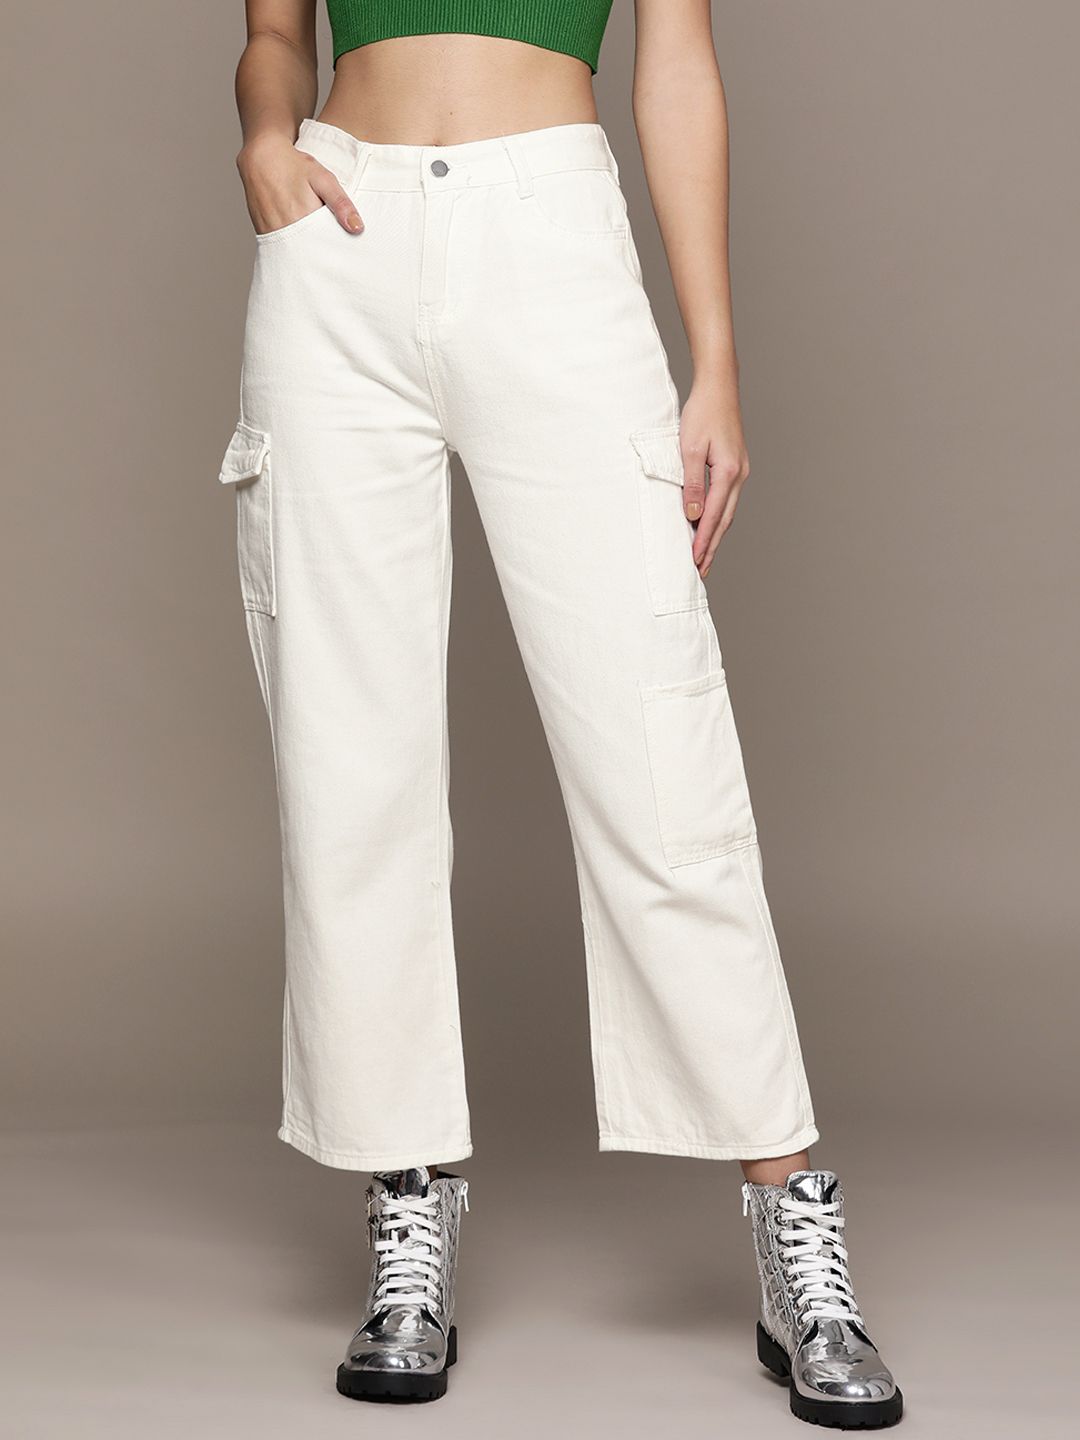 URBANIC Women White Cotton Relaxed Fit High-Rise Jeans Price in India